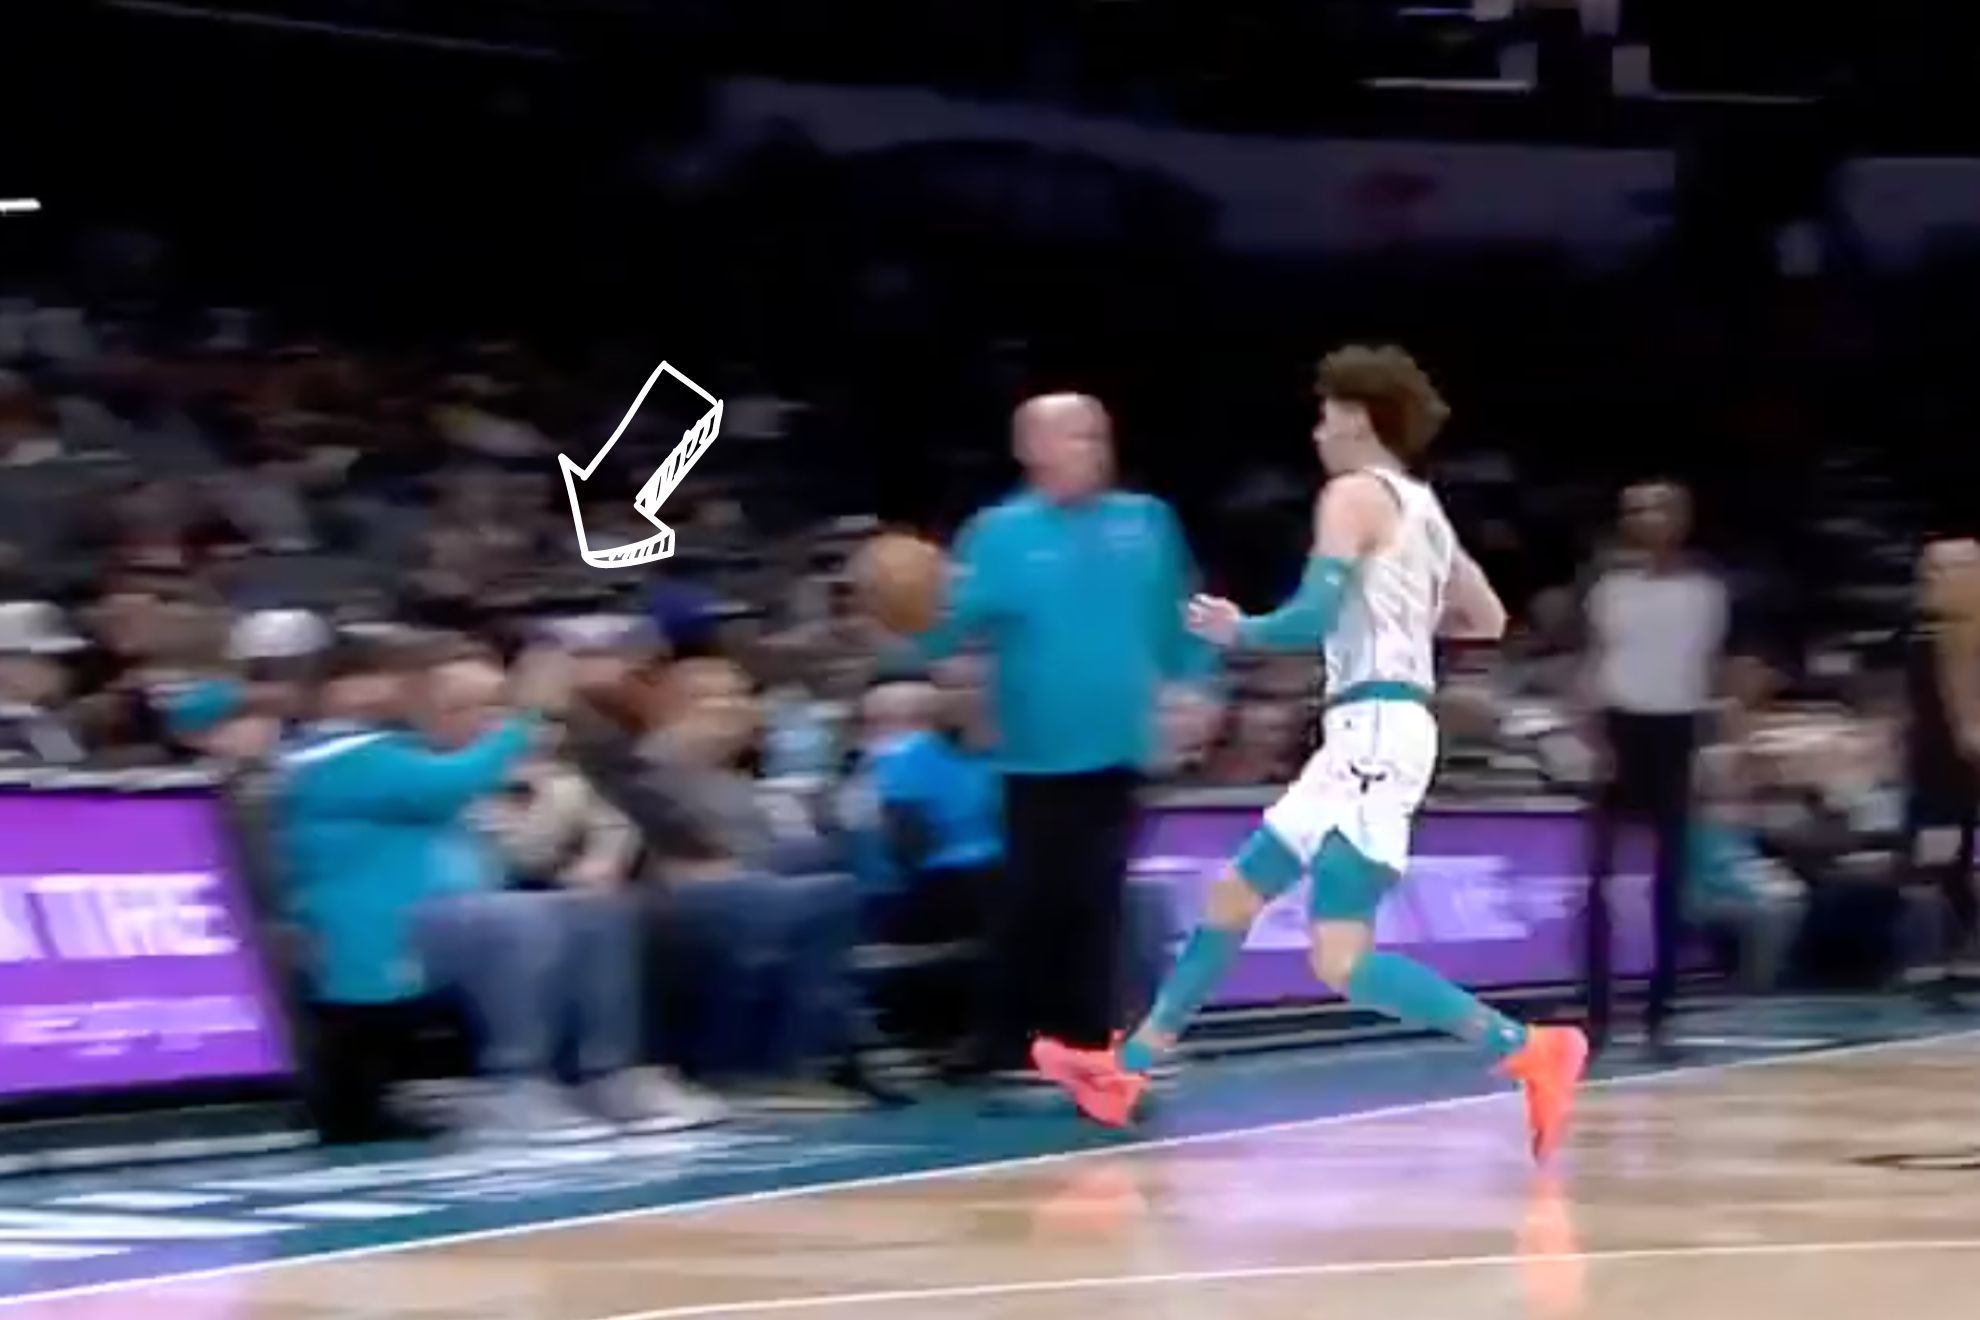 LaMelo Ball, moments before suffering an ankle injury and having to leave the game.